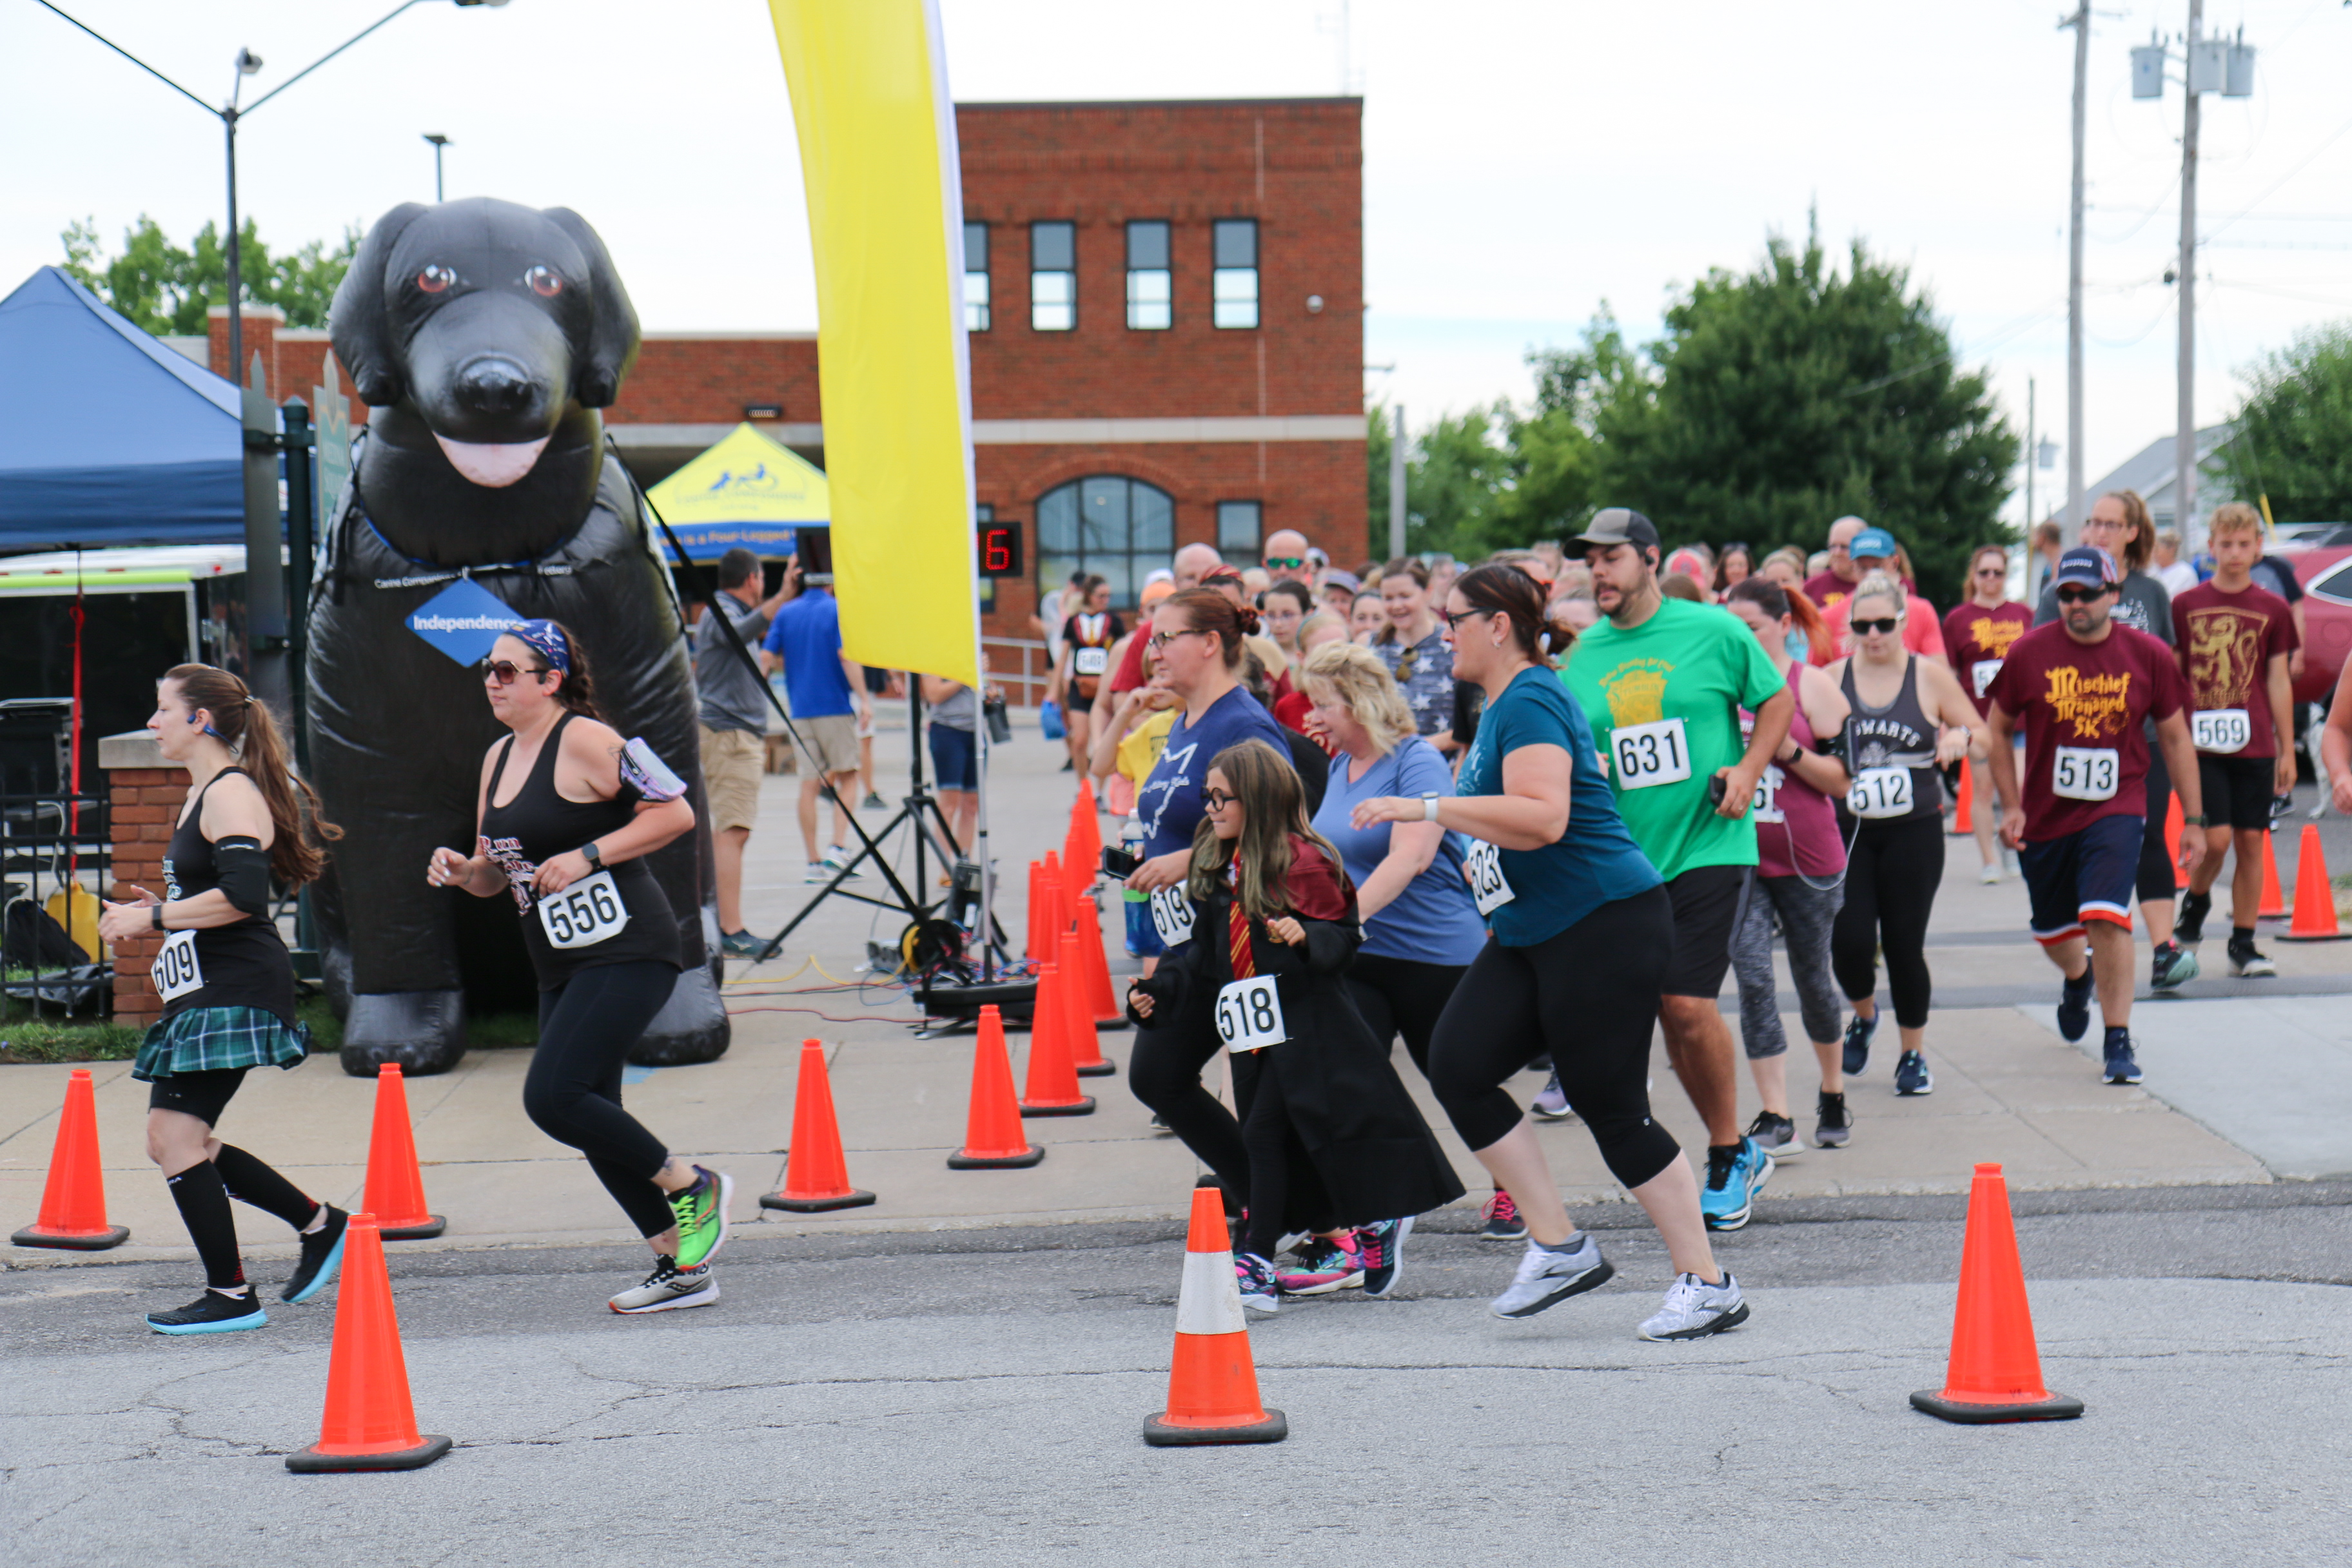 2nd Annual Mischief Managed 5k & 1 Mile Fun Run to Benefit Canine Companions